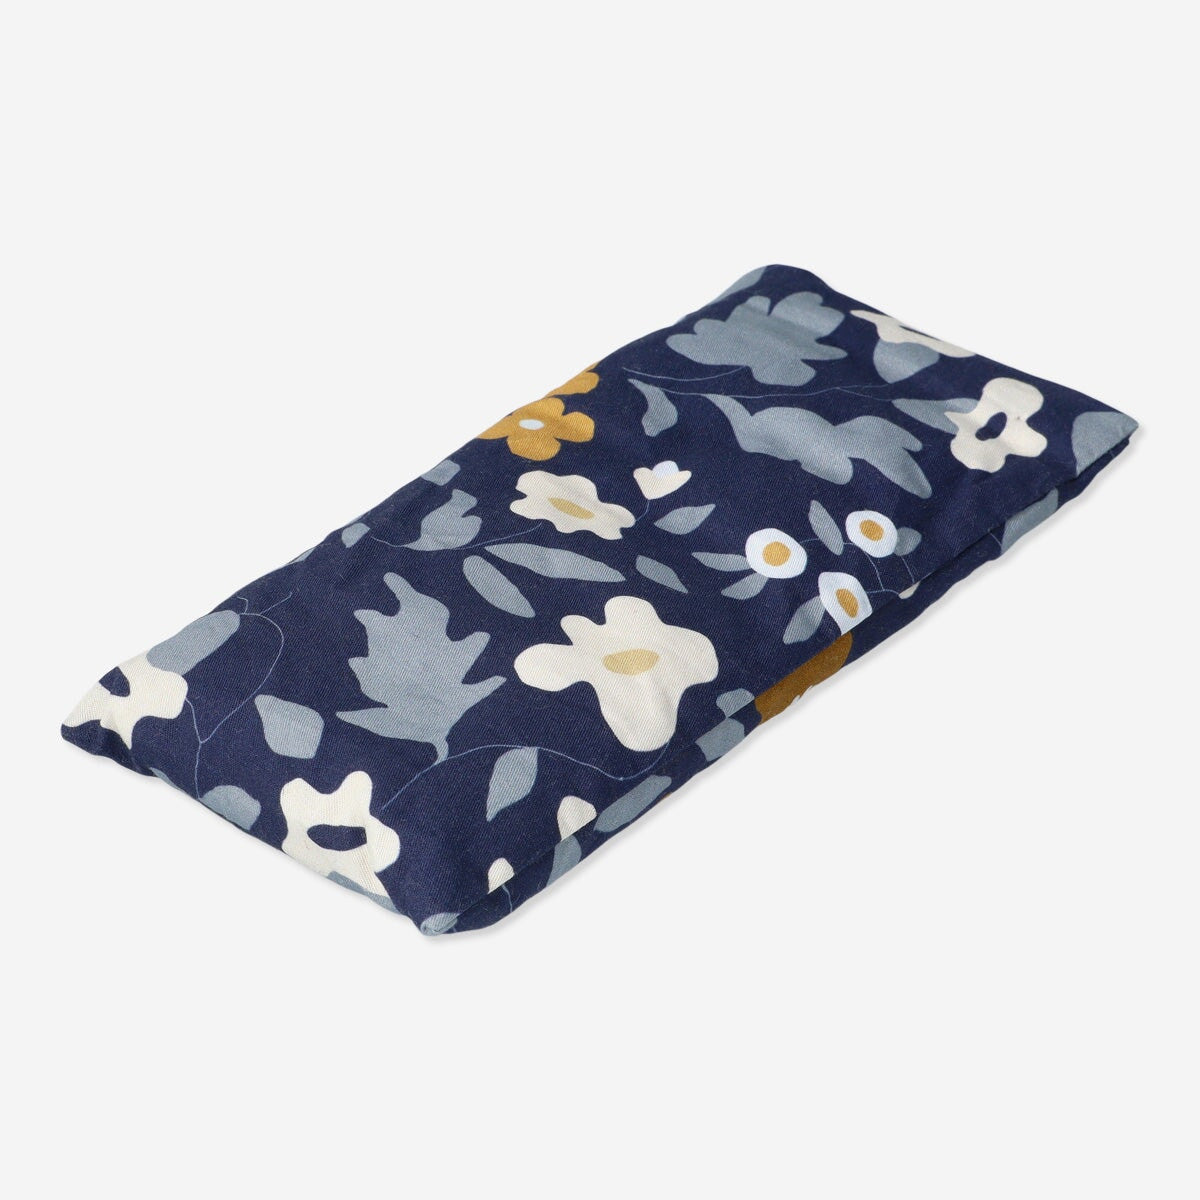 Yoga eye pillow. With cassia and lavender seeds Leisure Flying Tiger Copenhagen 